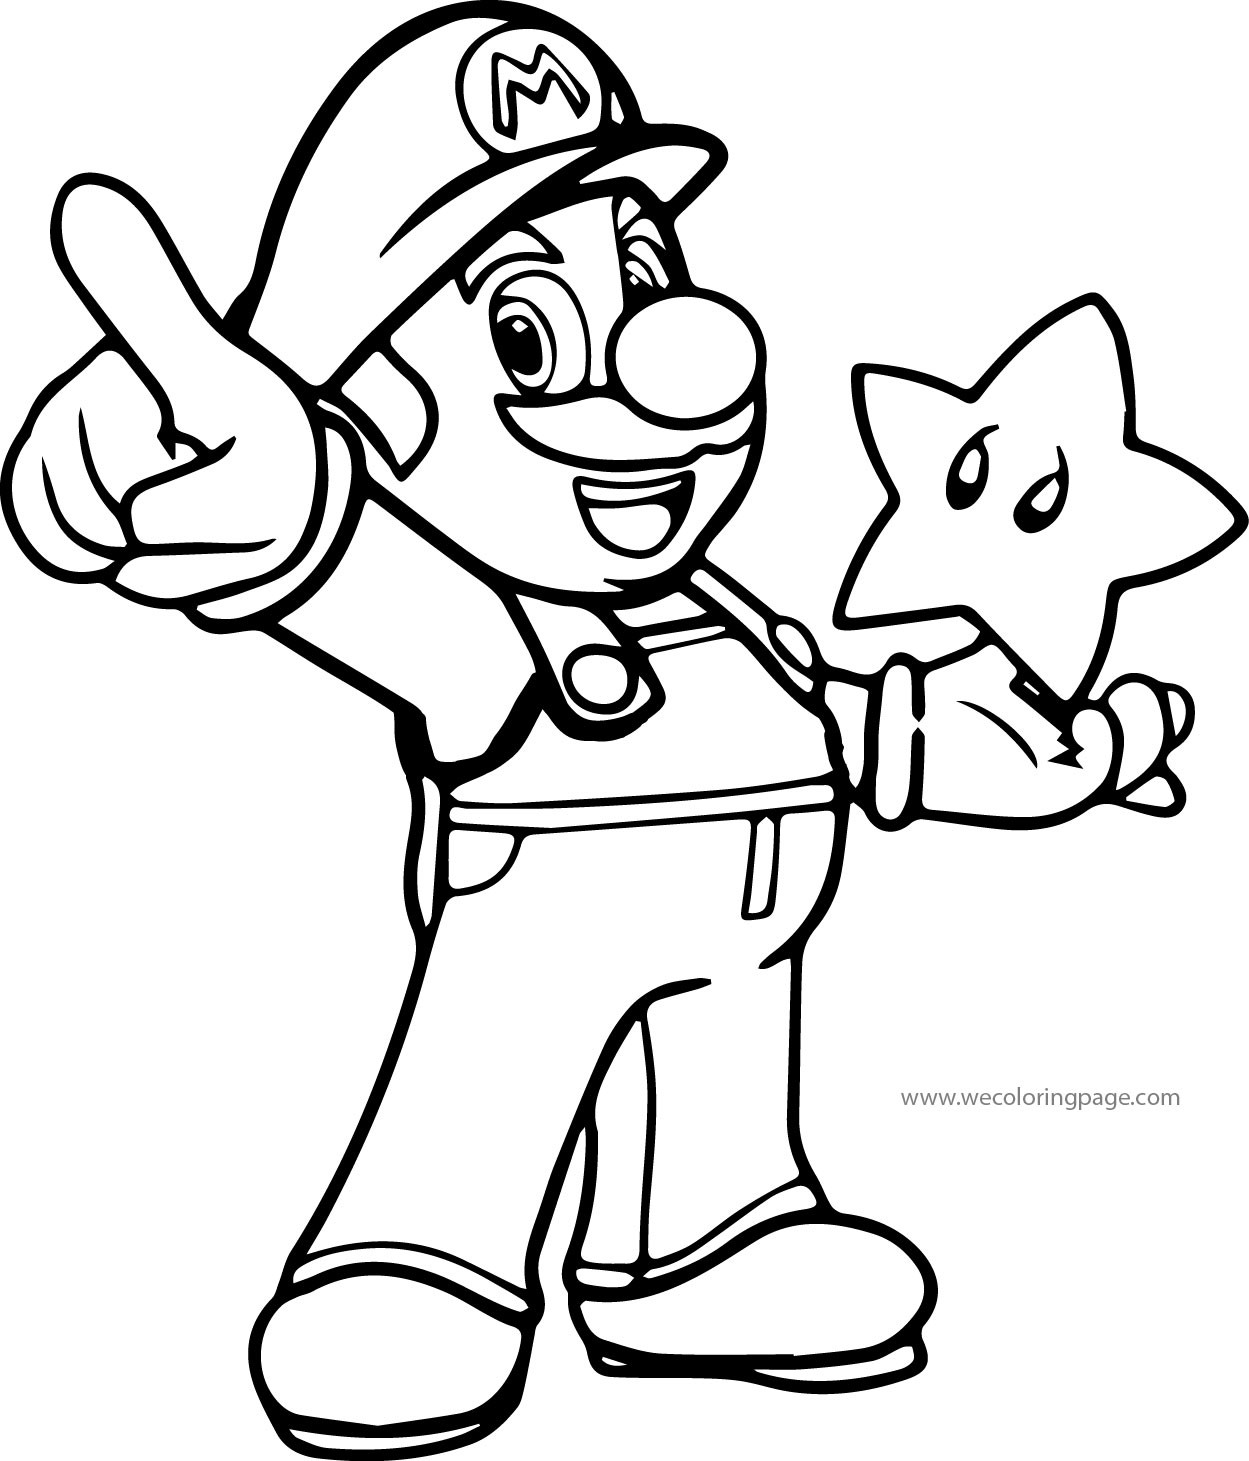 Super Coloring Pages
 Super Mario Coloring Page